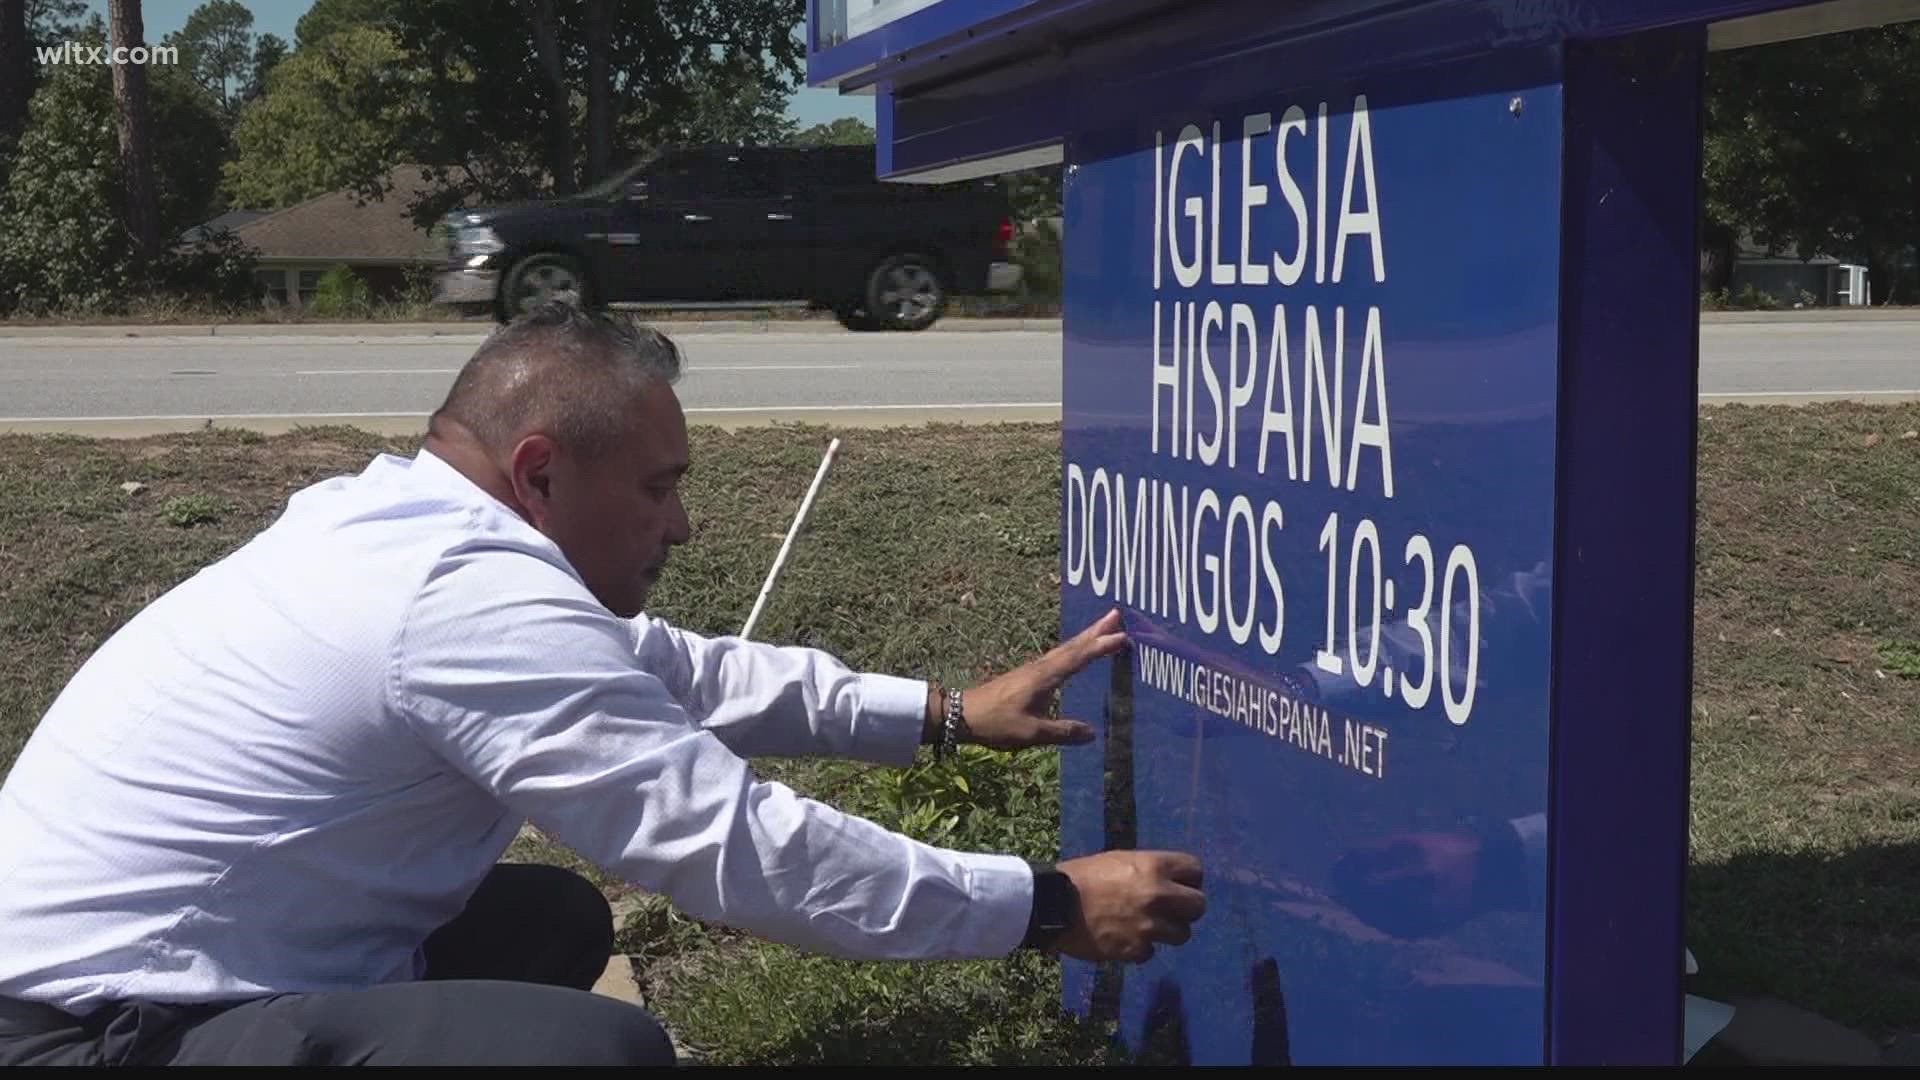 Javier Polo is a pastor at First Assembly of God in Sumter. While he’s led a Hispanic ministry at the church since 2009, he’s expanding that mission now.